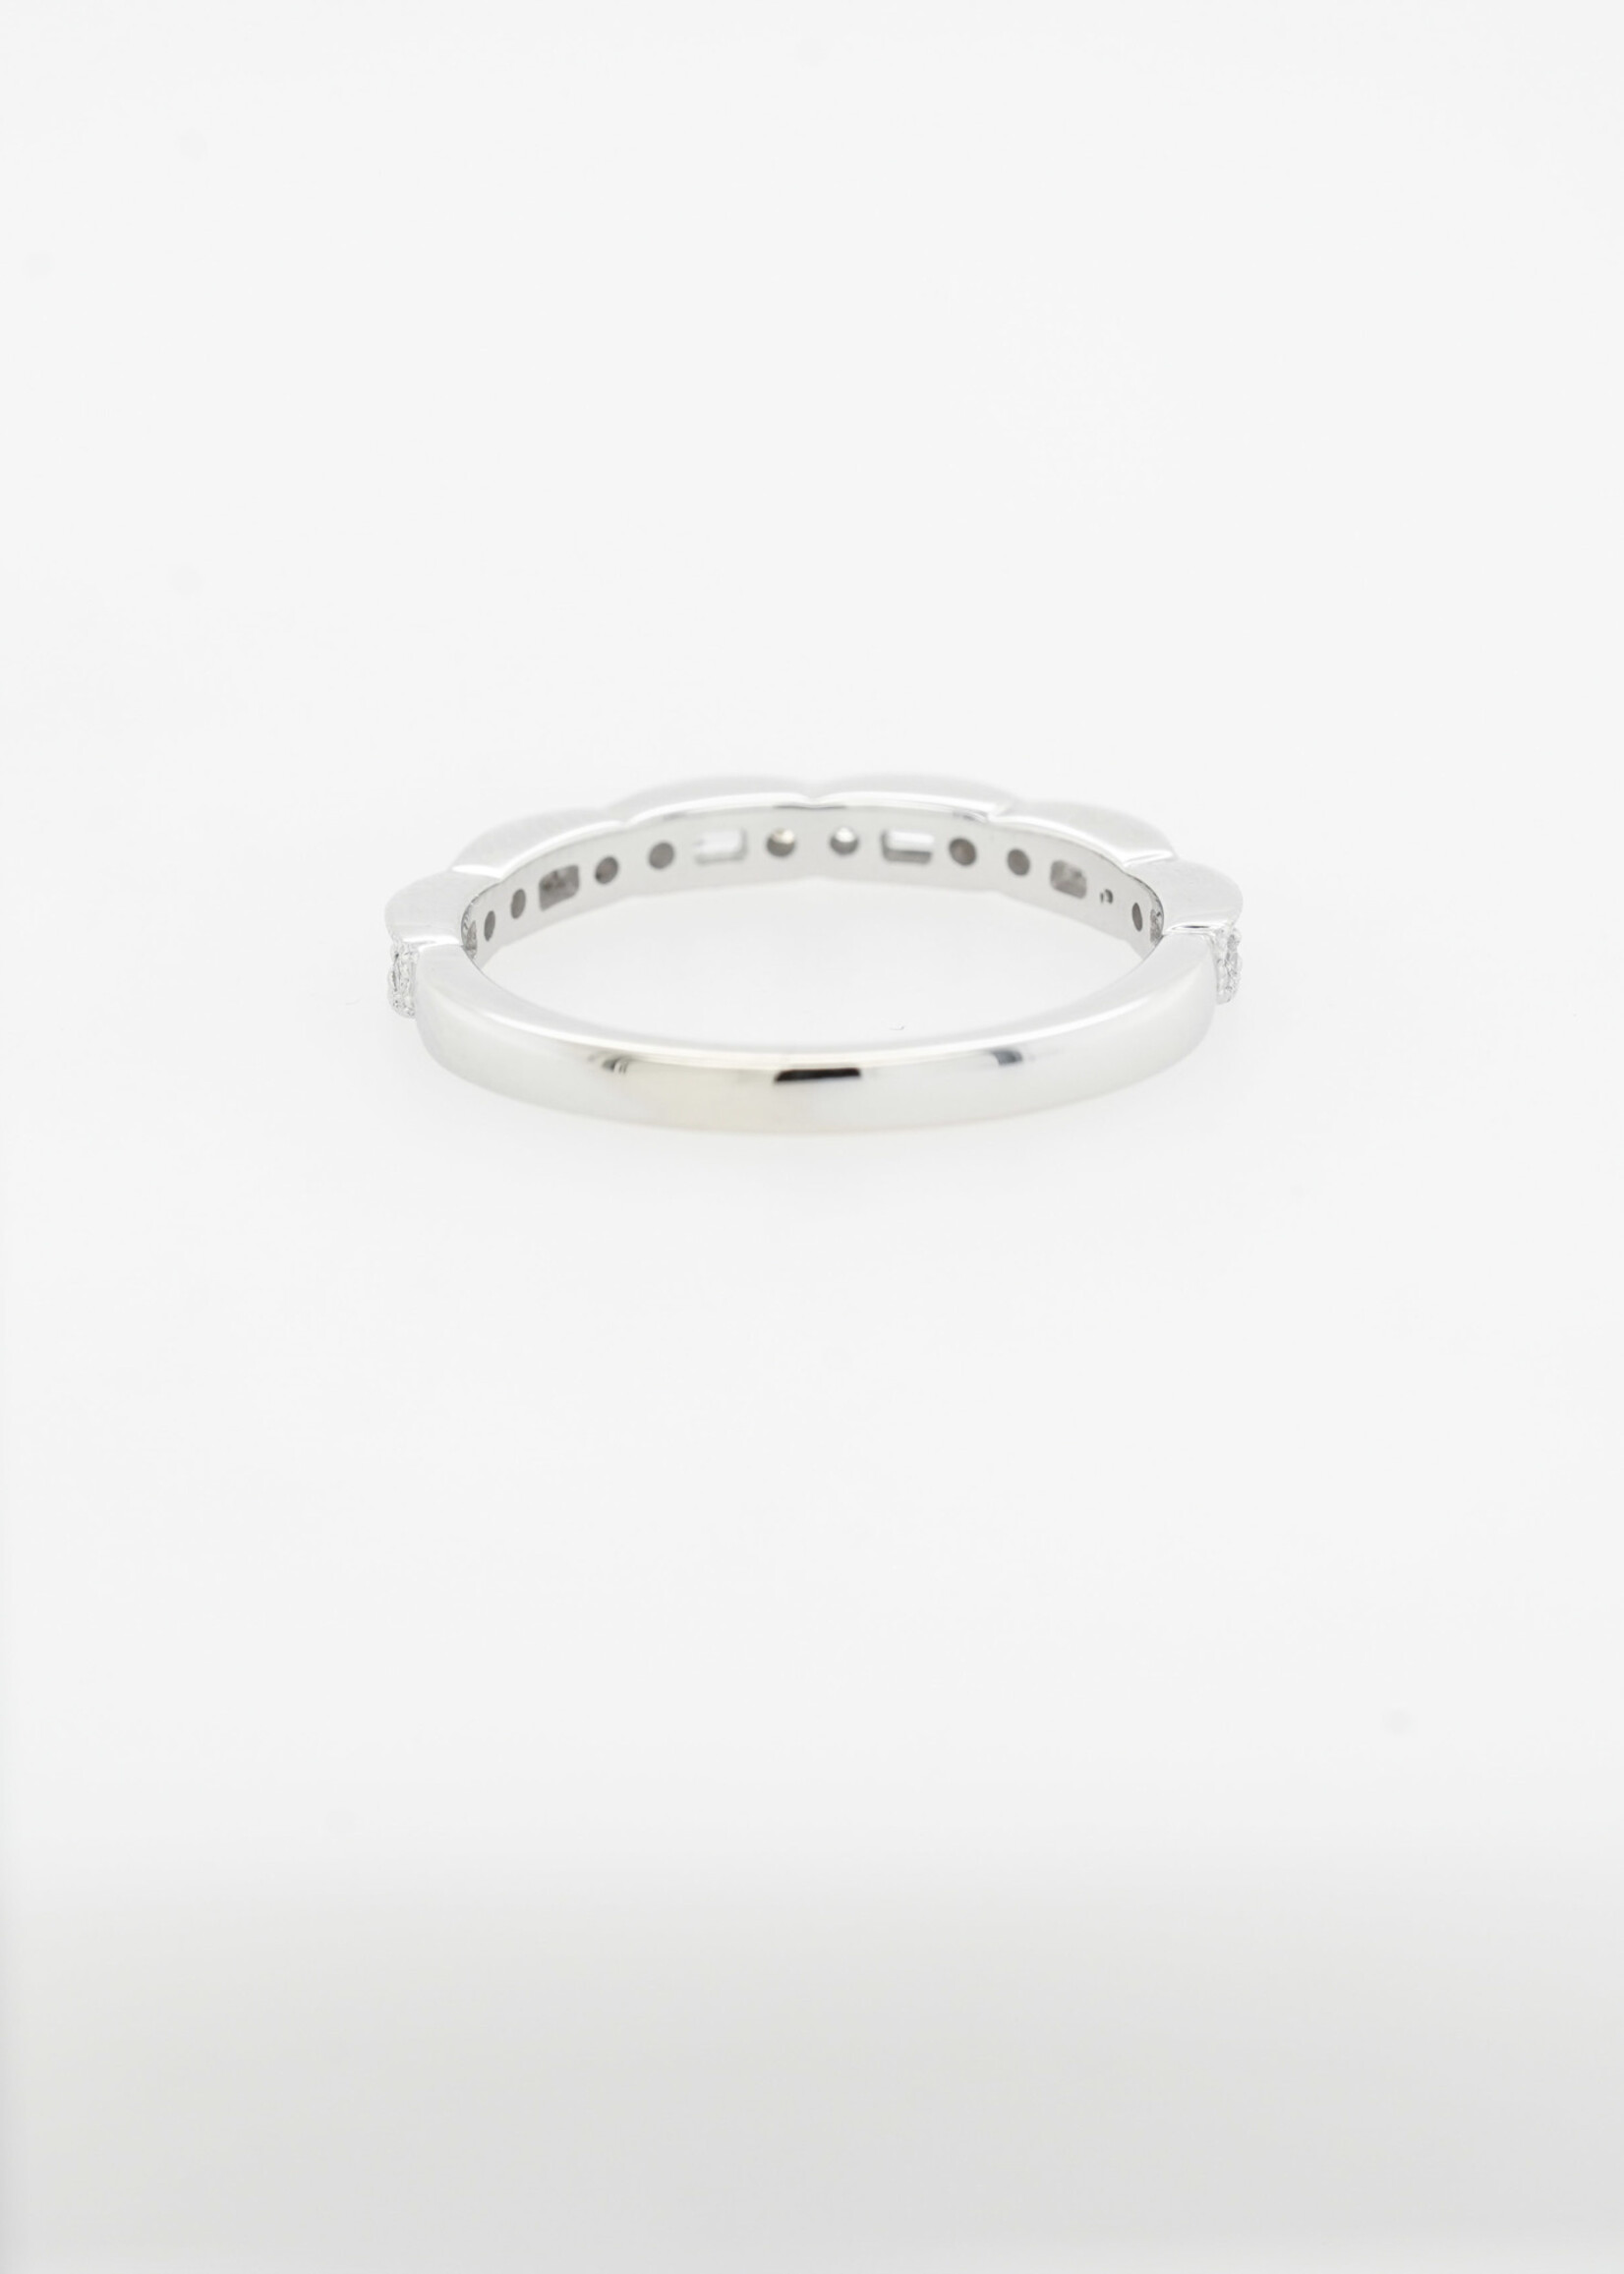 14KW 2.6g .28ctw Diamond Stackable Band (size 7)